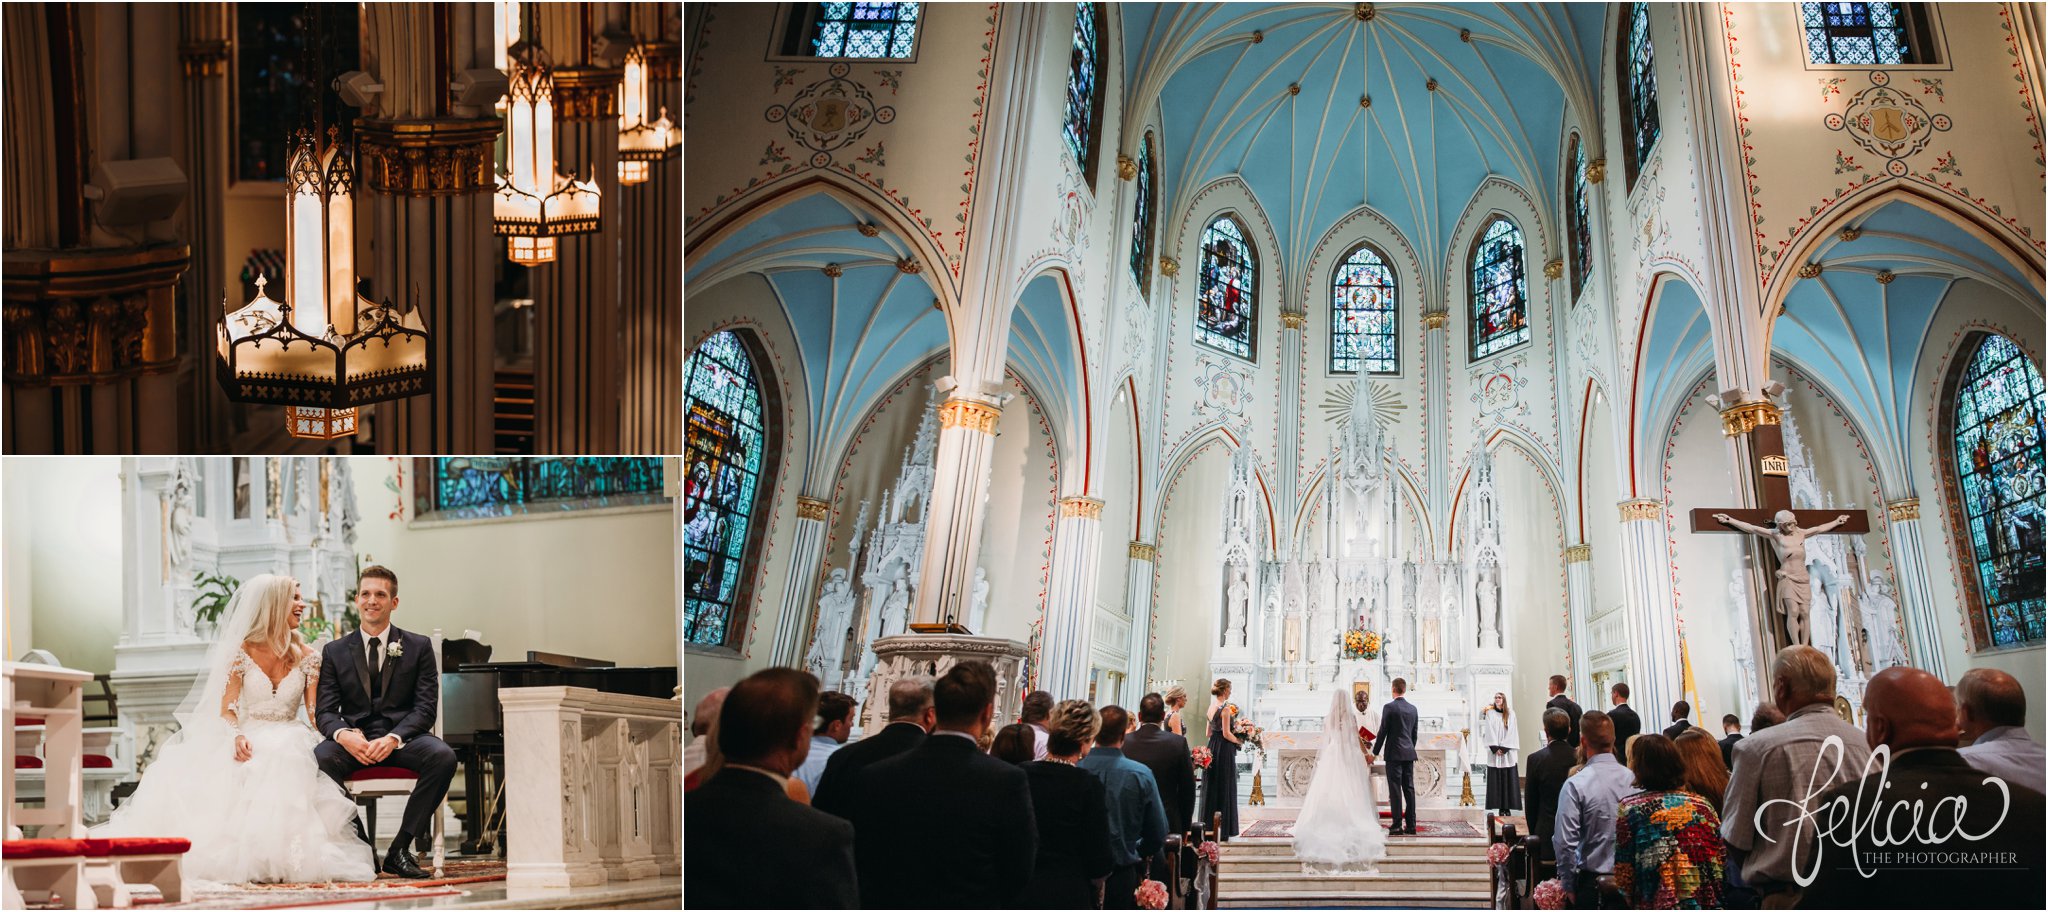 images by feliciathephotographer.com | wedding photographer | kansas city | redemptorist | classic | ceremony | bride and groom | praying | romantic lighting | church | catholic | our lady of perpetual help | 